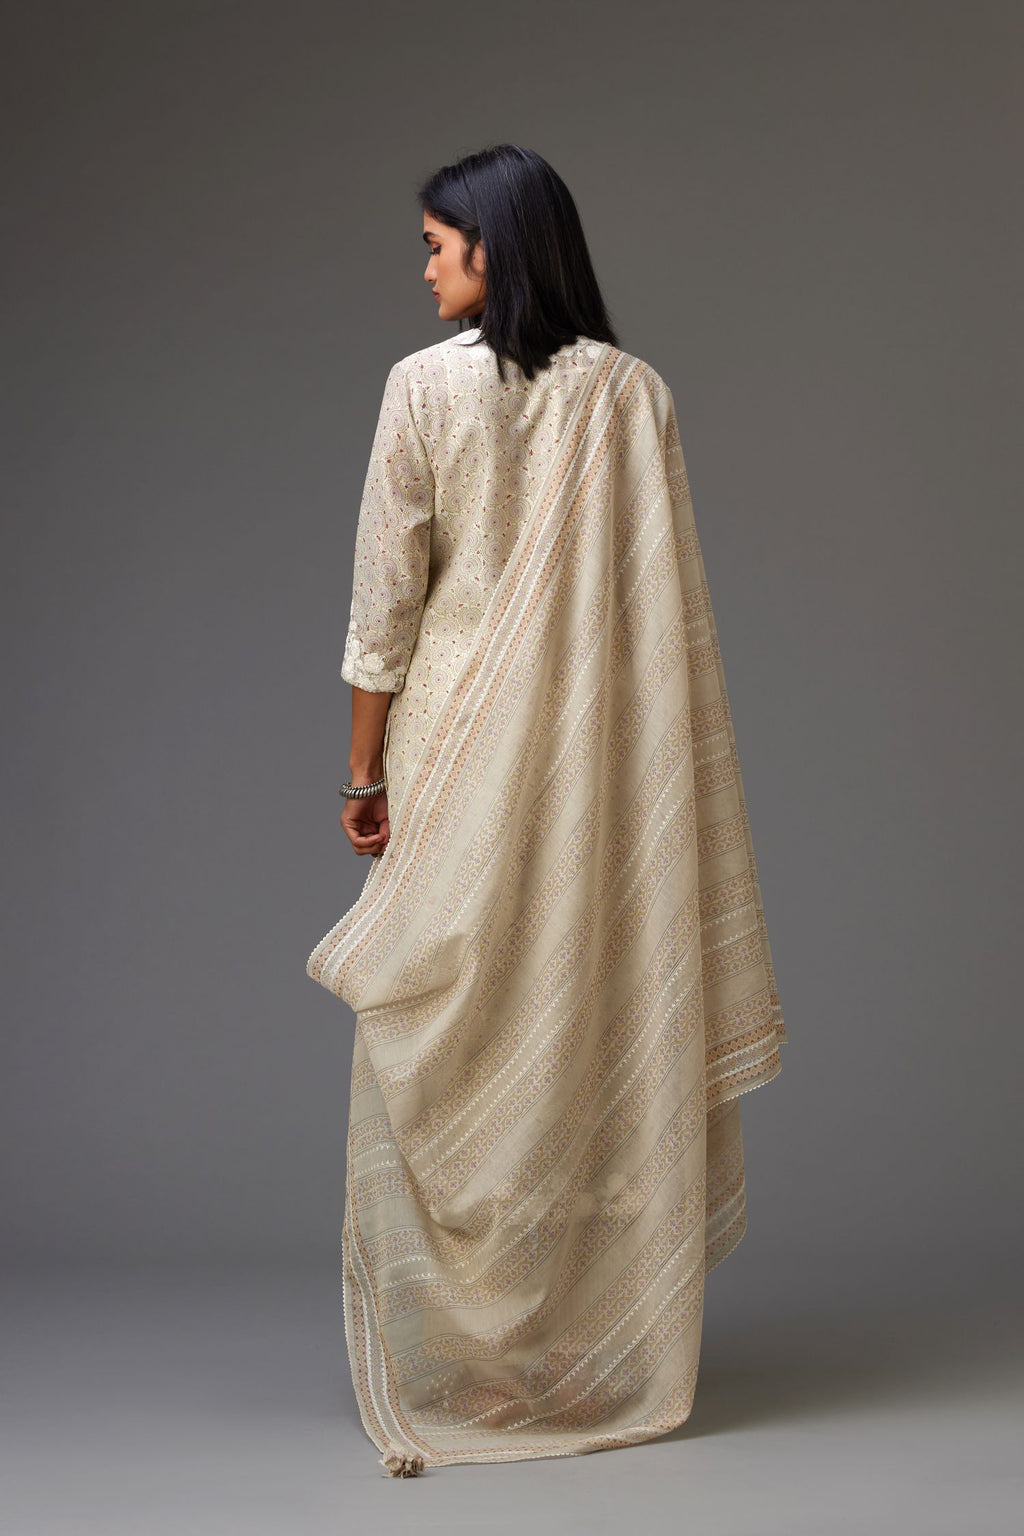 Beige & grey hand block printed Cotton Chanderi dupatta, with embroidery and ric-rac lace.